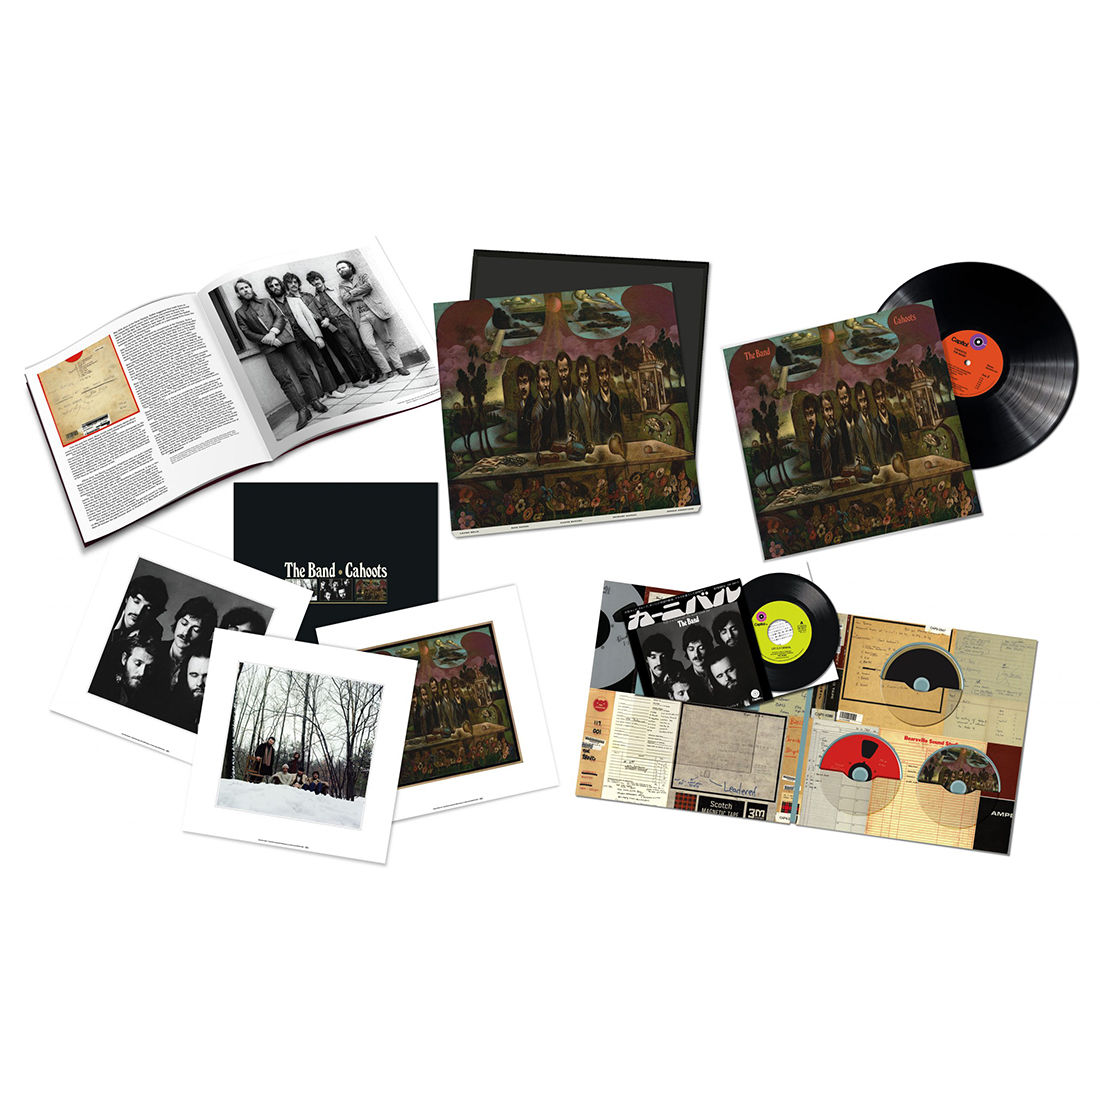 The Band - Cahoots - 50th Anniversary: Super Deluxe Edition Vinyl Box Set